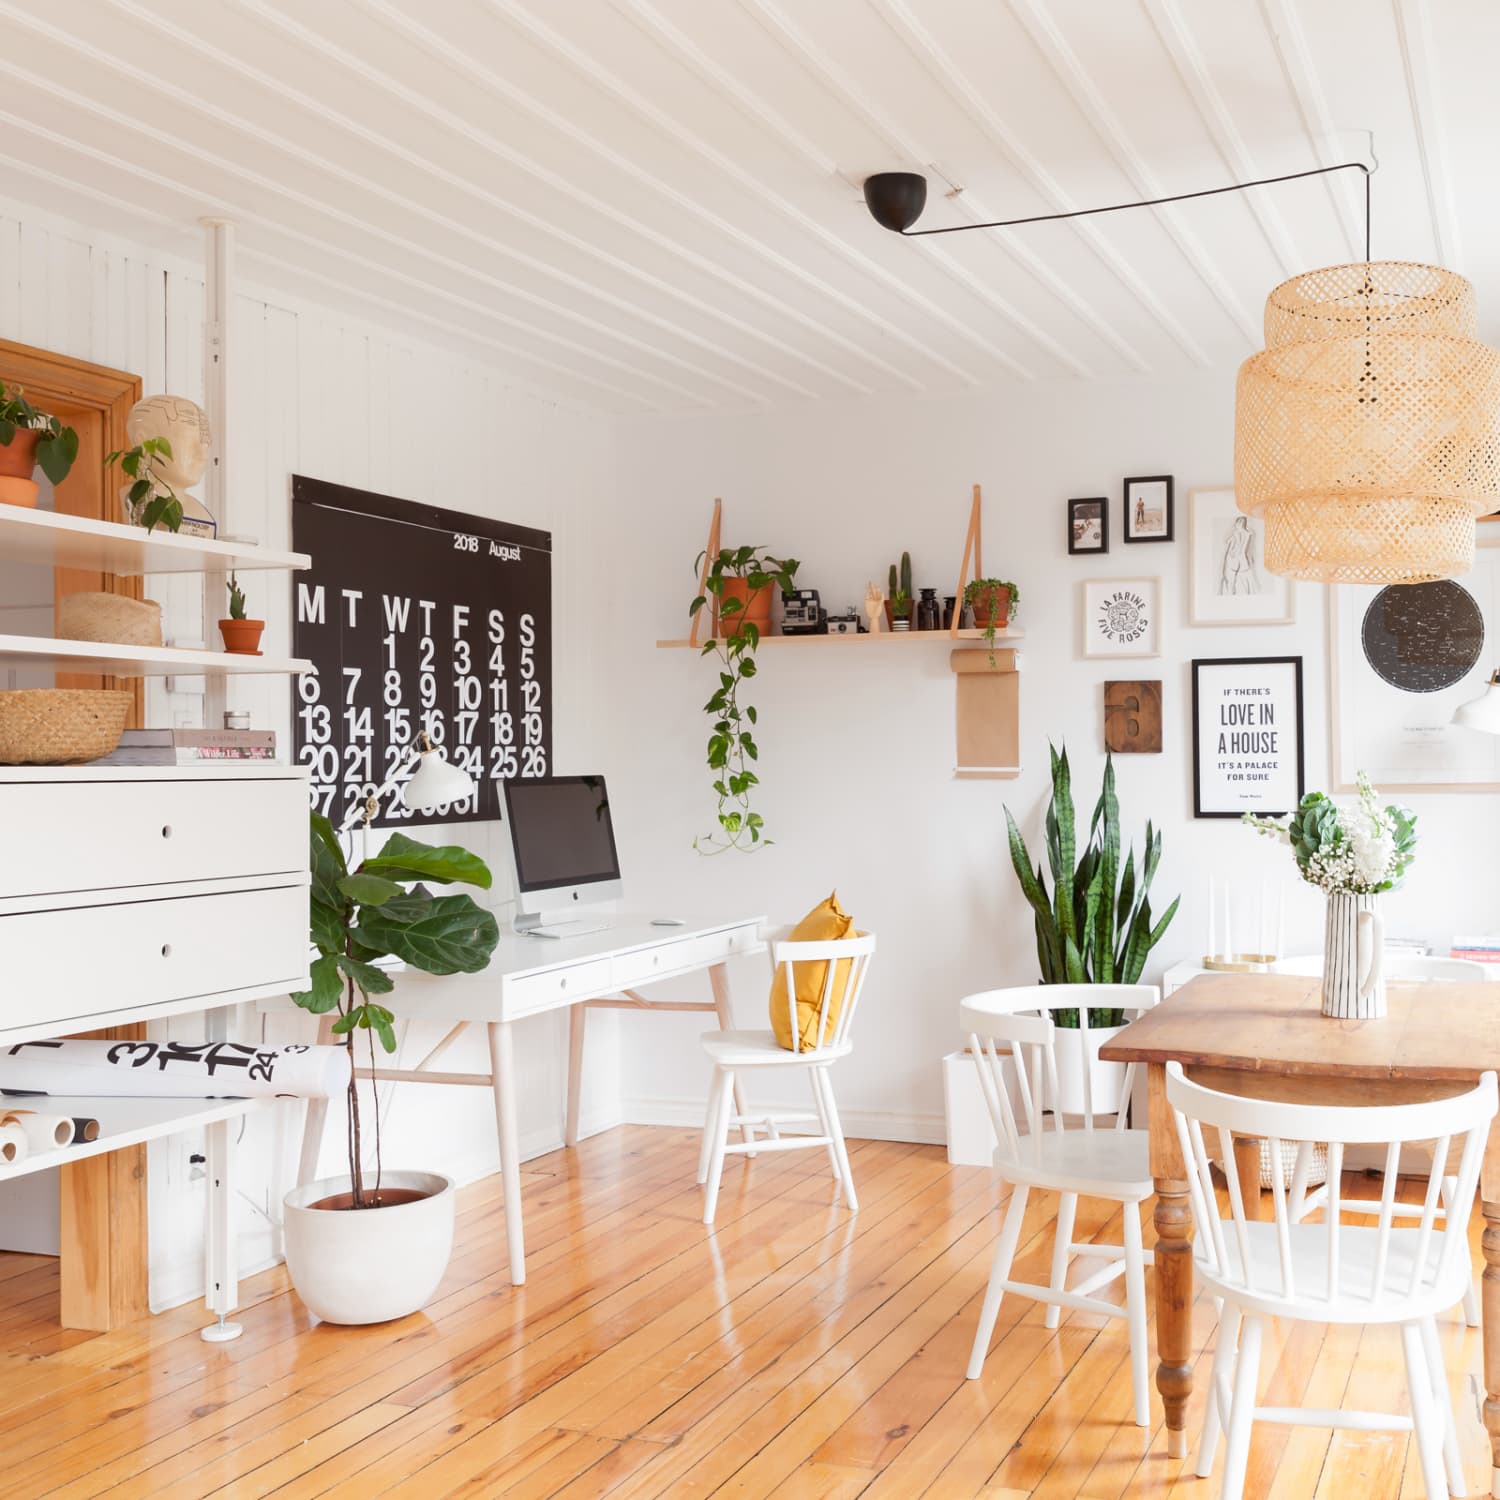 Ikea Is Now Selling Tiny Homes - and They're As Stylish As You'd Expect